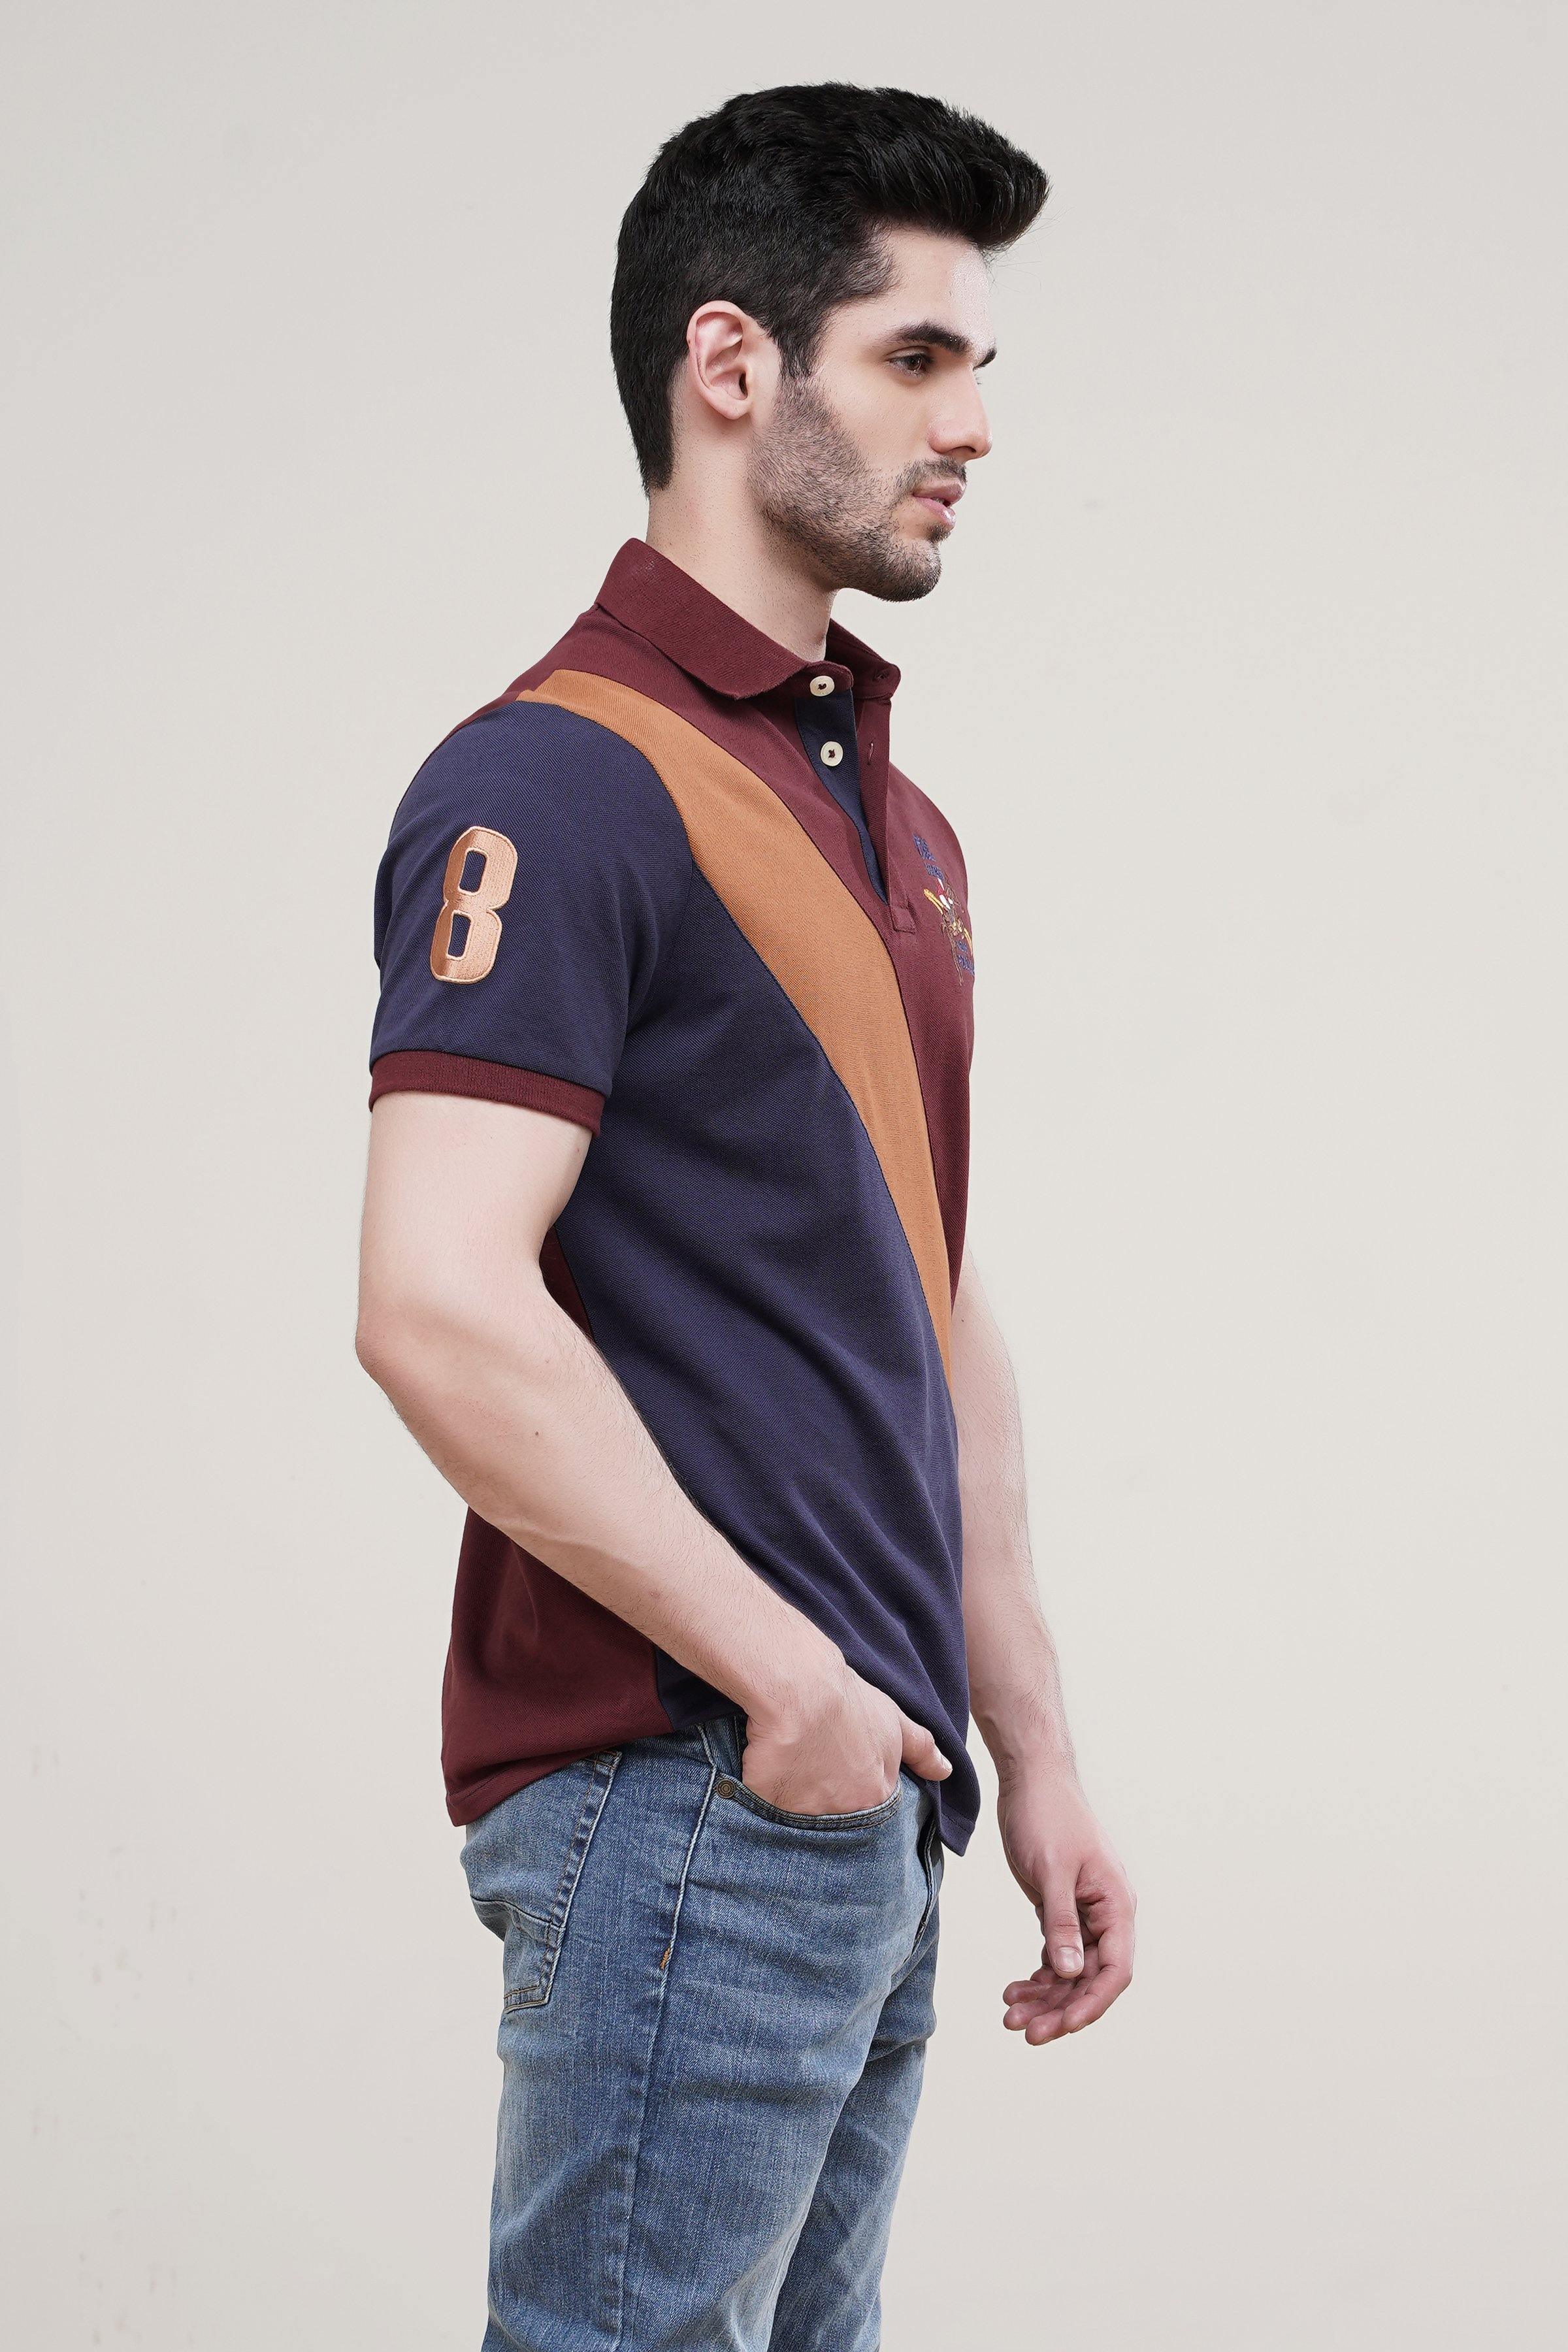 POLO SHIRT CROSS PANNEL MAROON at Charcoal Clothing